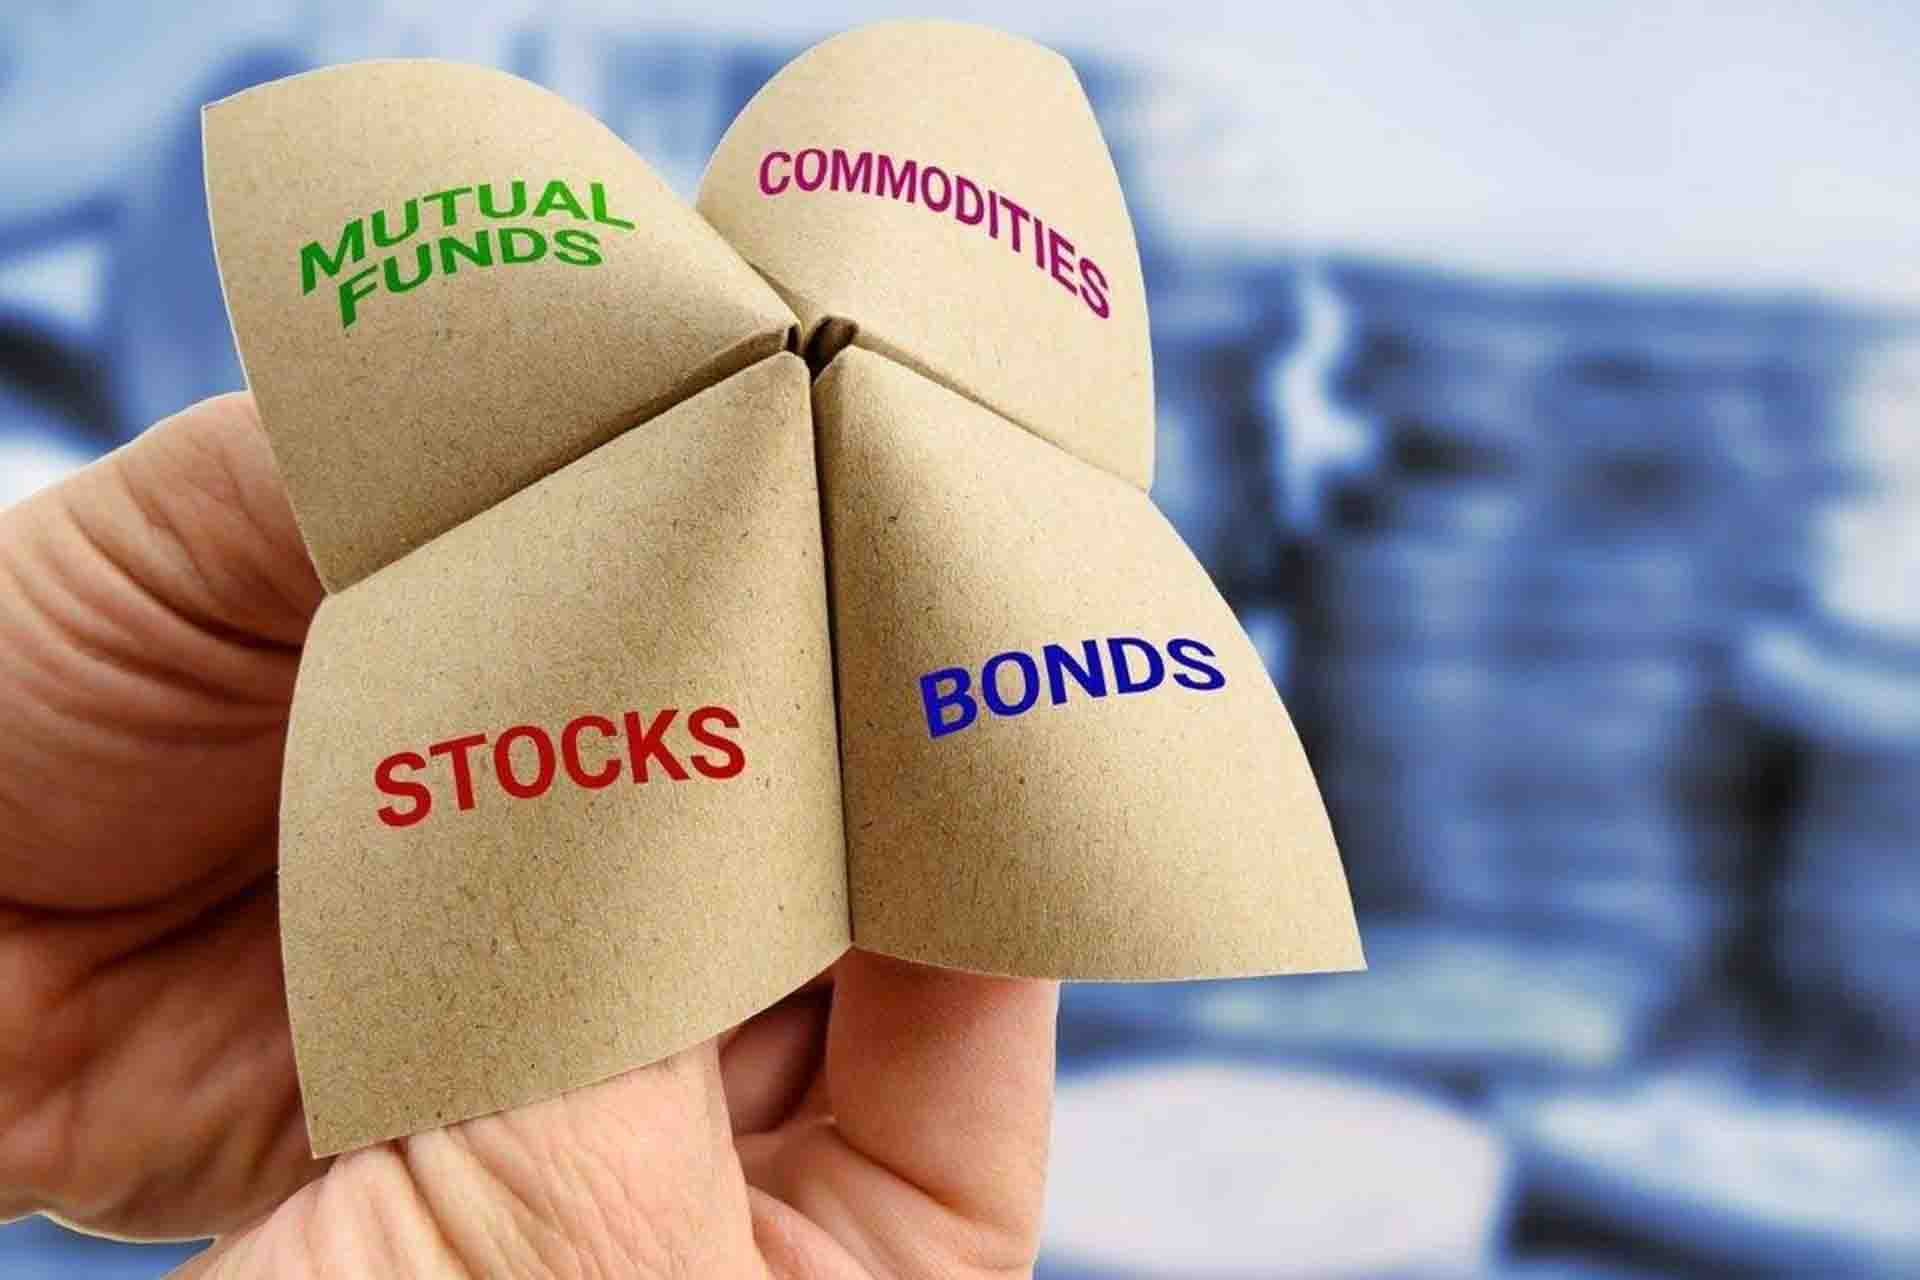 Mutual Funds Investment: Advantages and Disadvantages